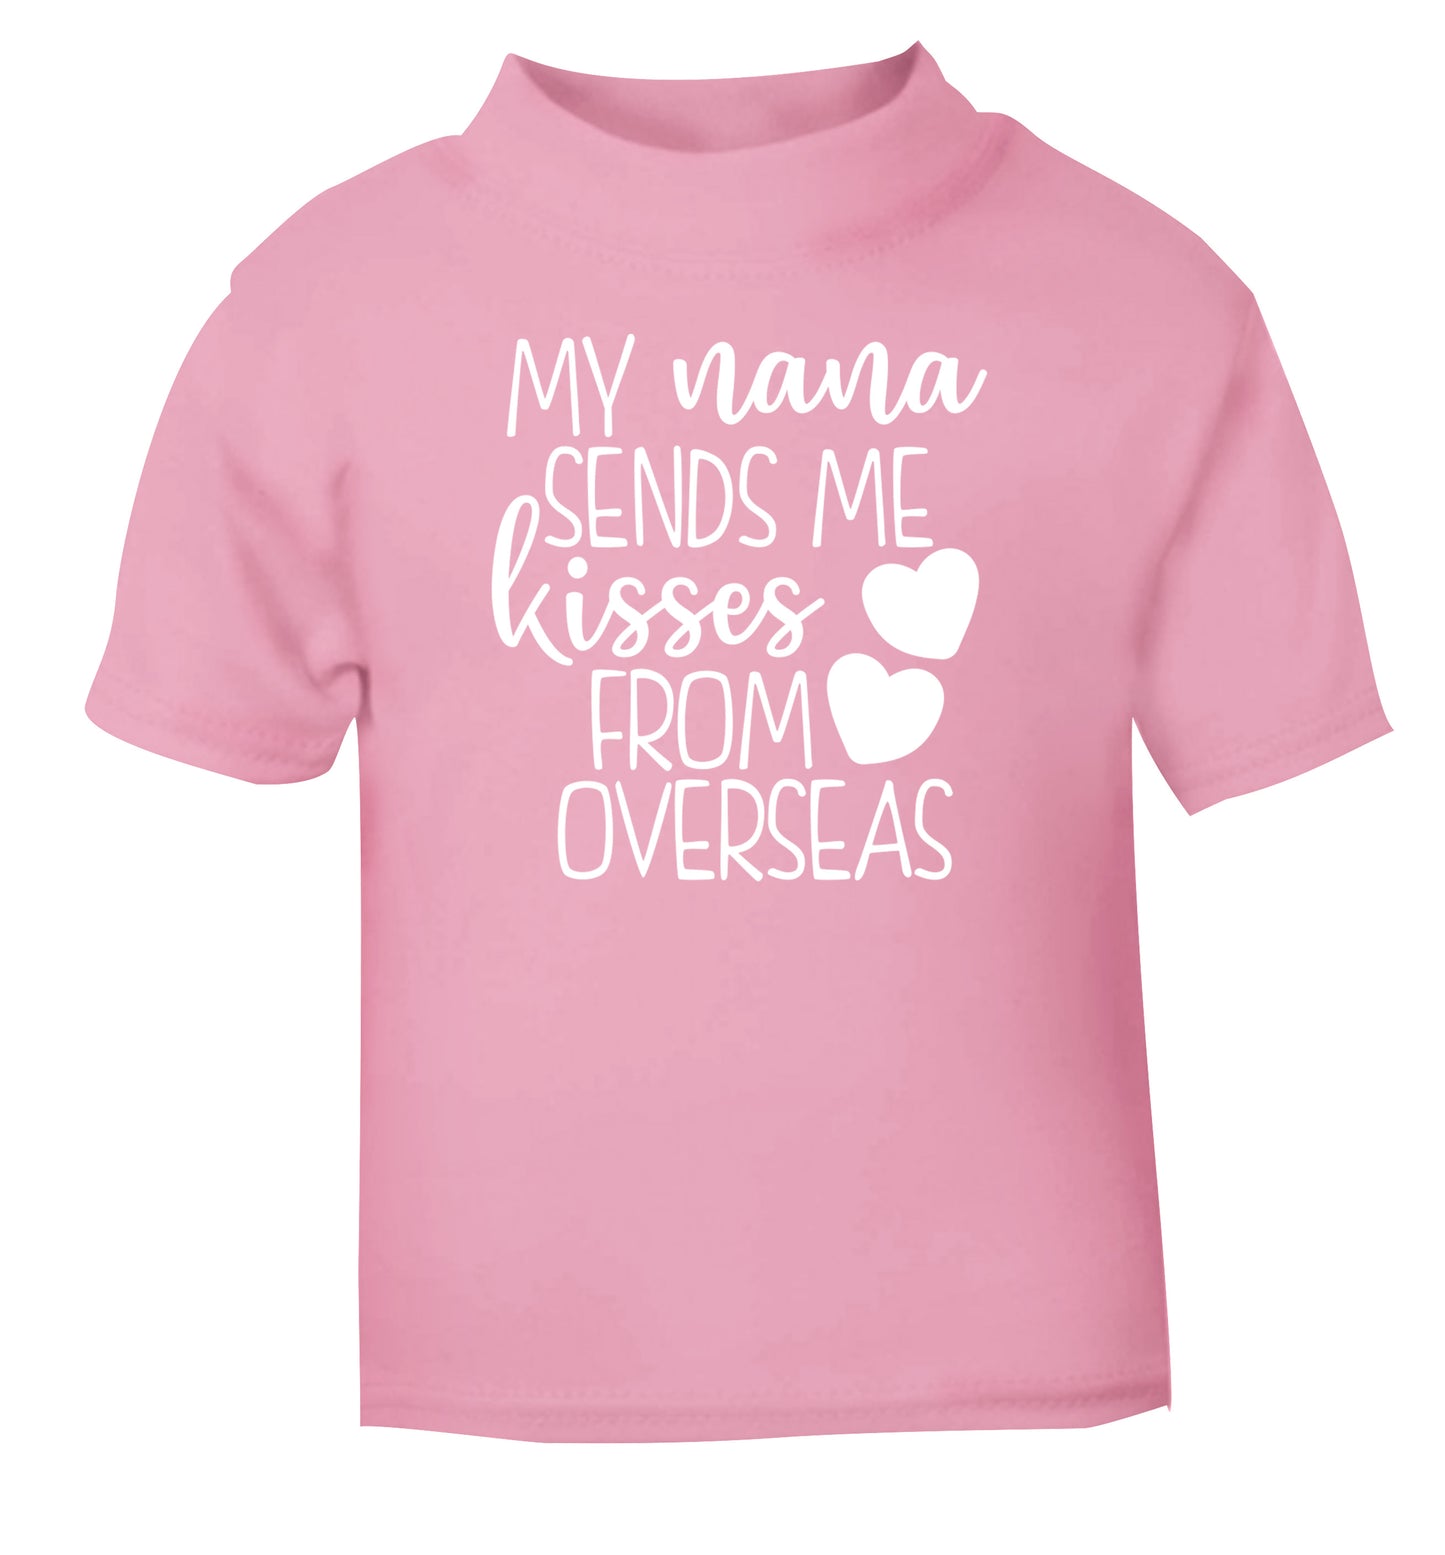 My nana sends me kisses from overseas light pink Baby Toddler Tshirt 2 Years